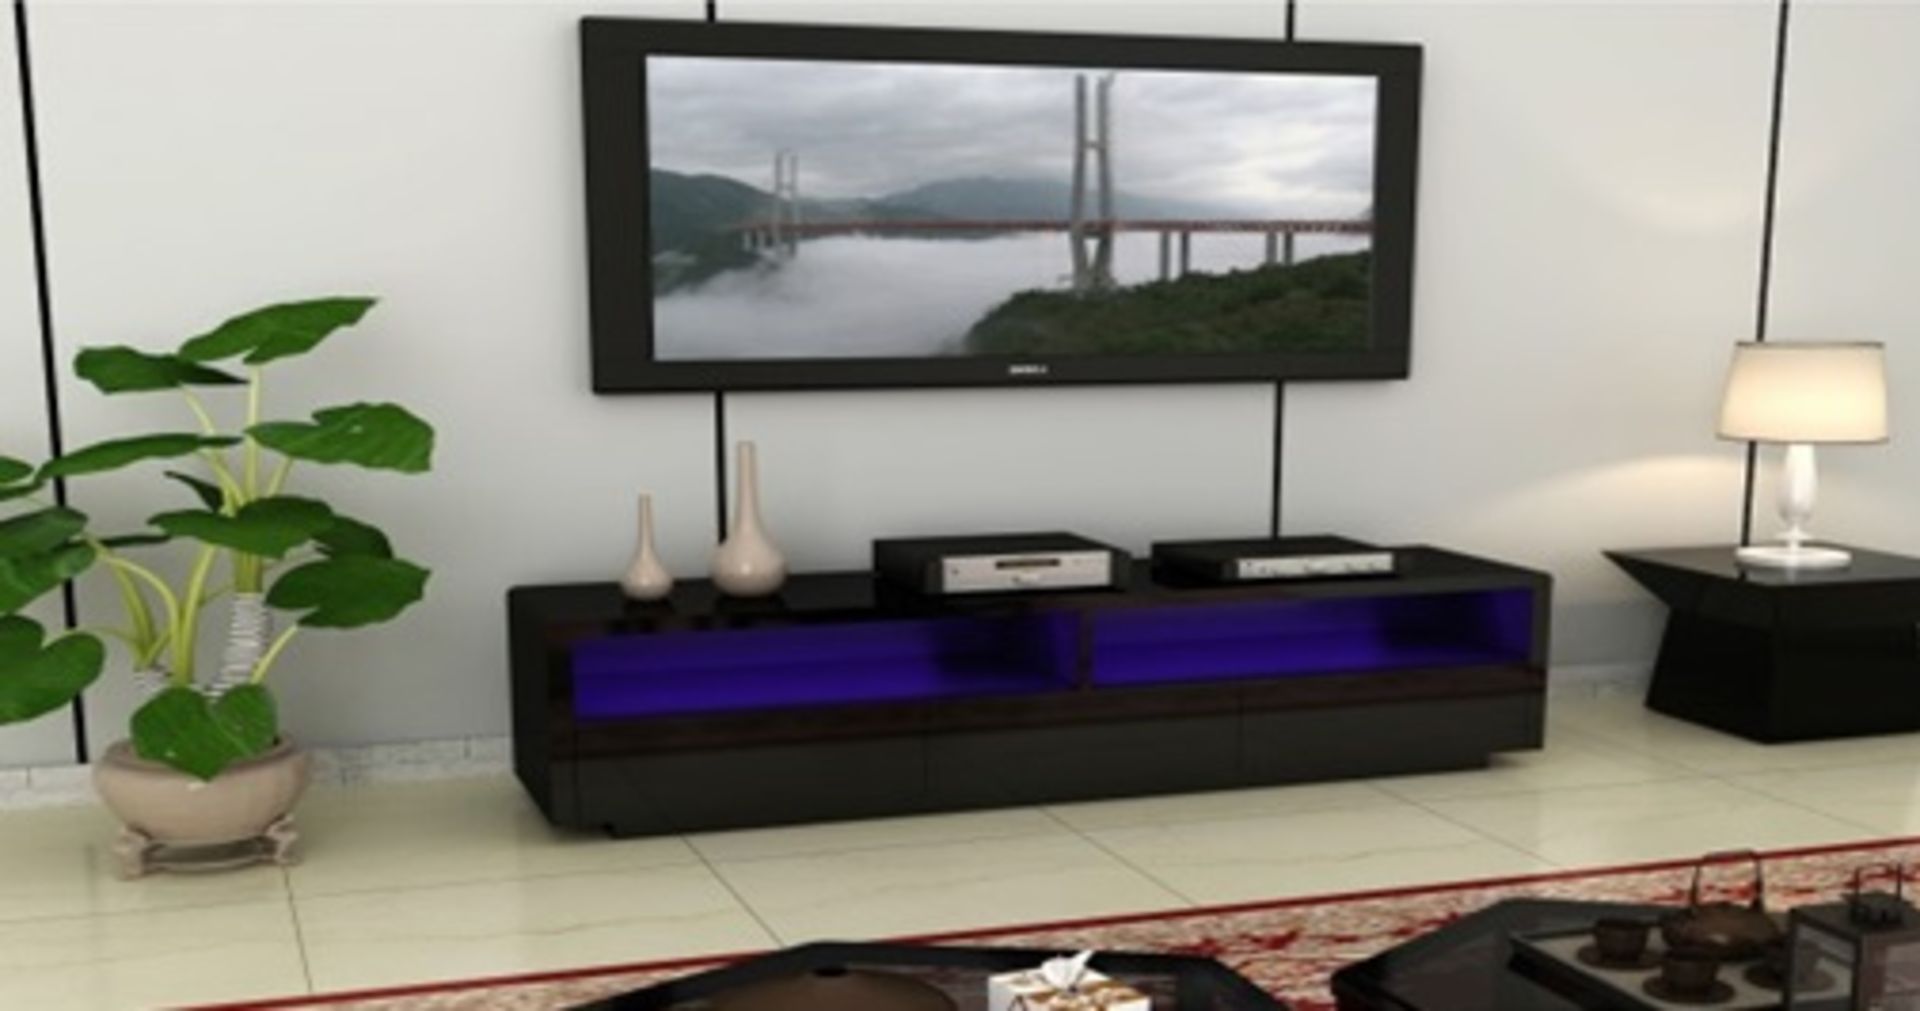 1 x Black High Gloss LED Light TV Unit With Drawers (Brand New & Boxed)